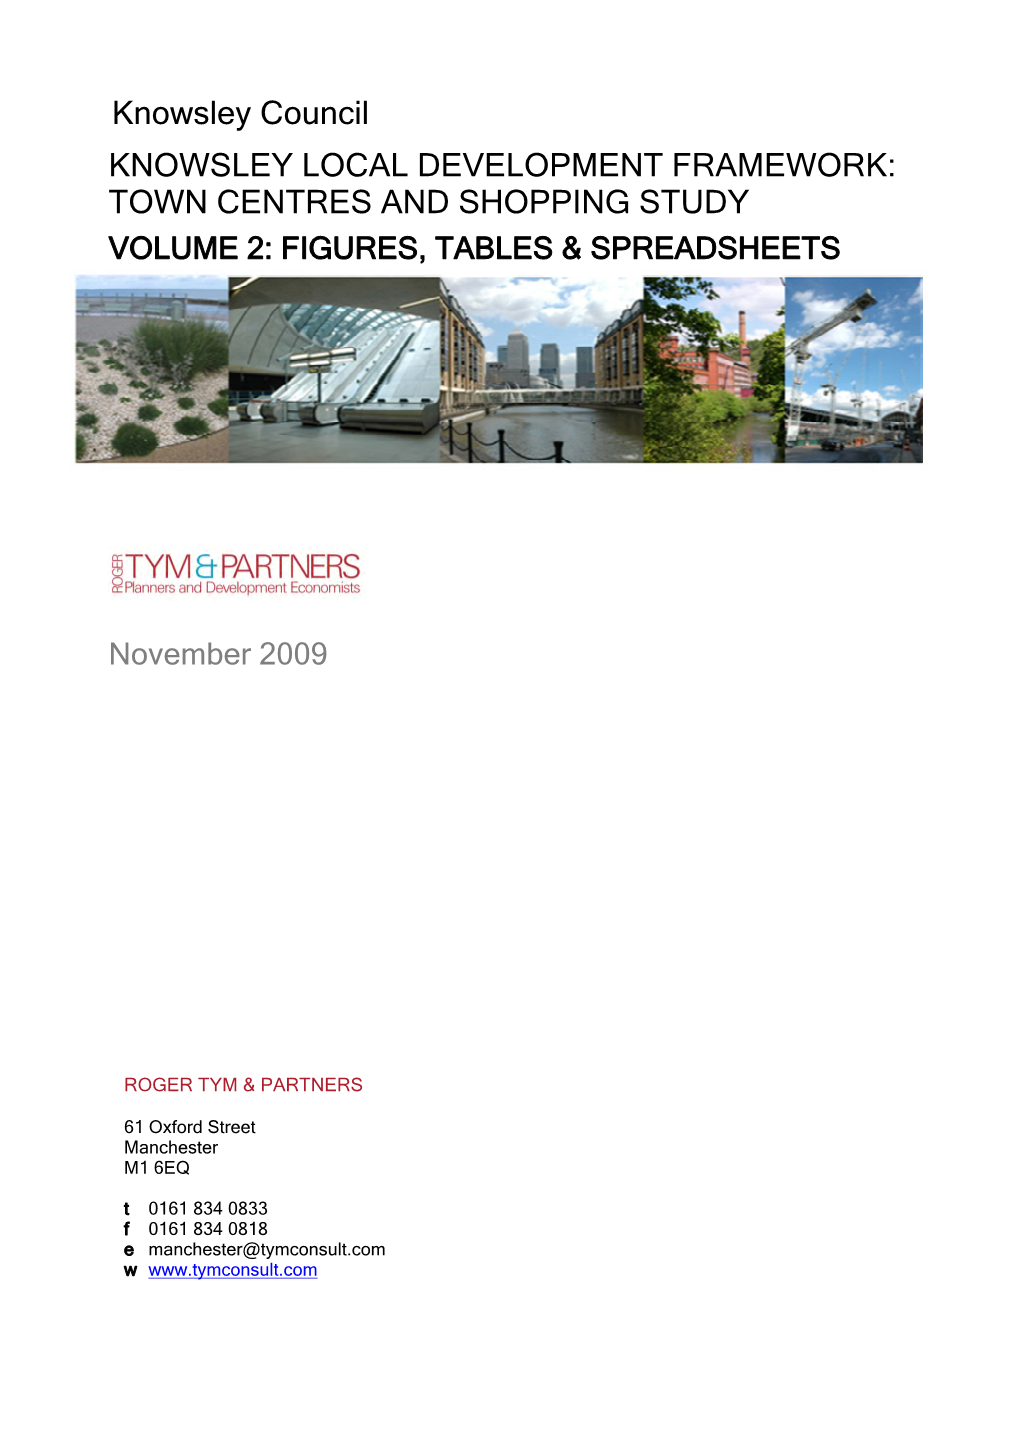 Town Centres and Shopping Study Volume 2: Figures, Tables & Spreadsheets